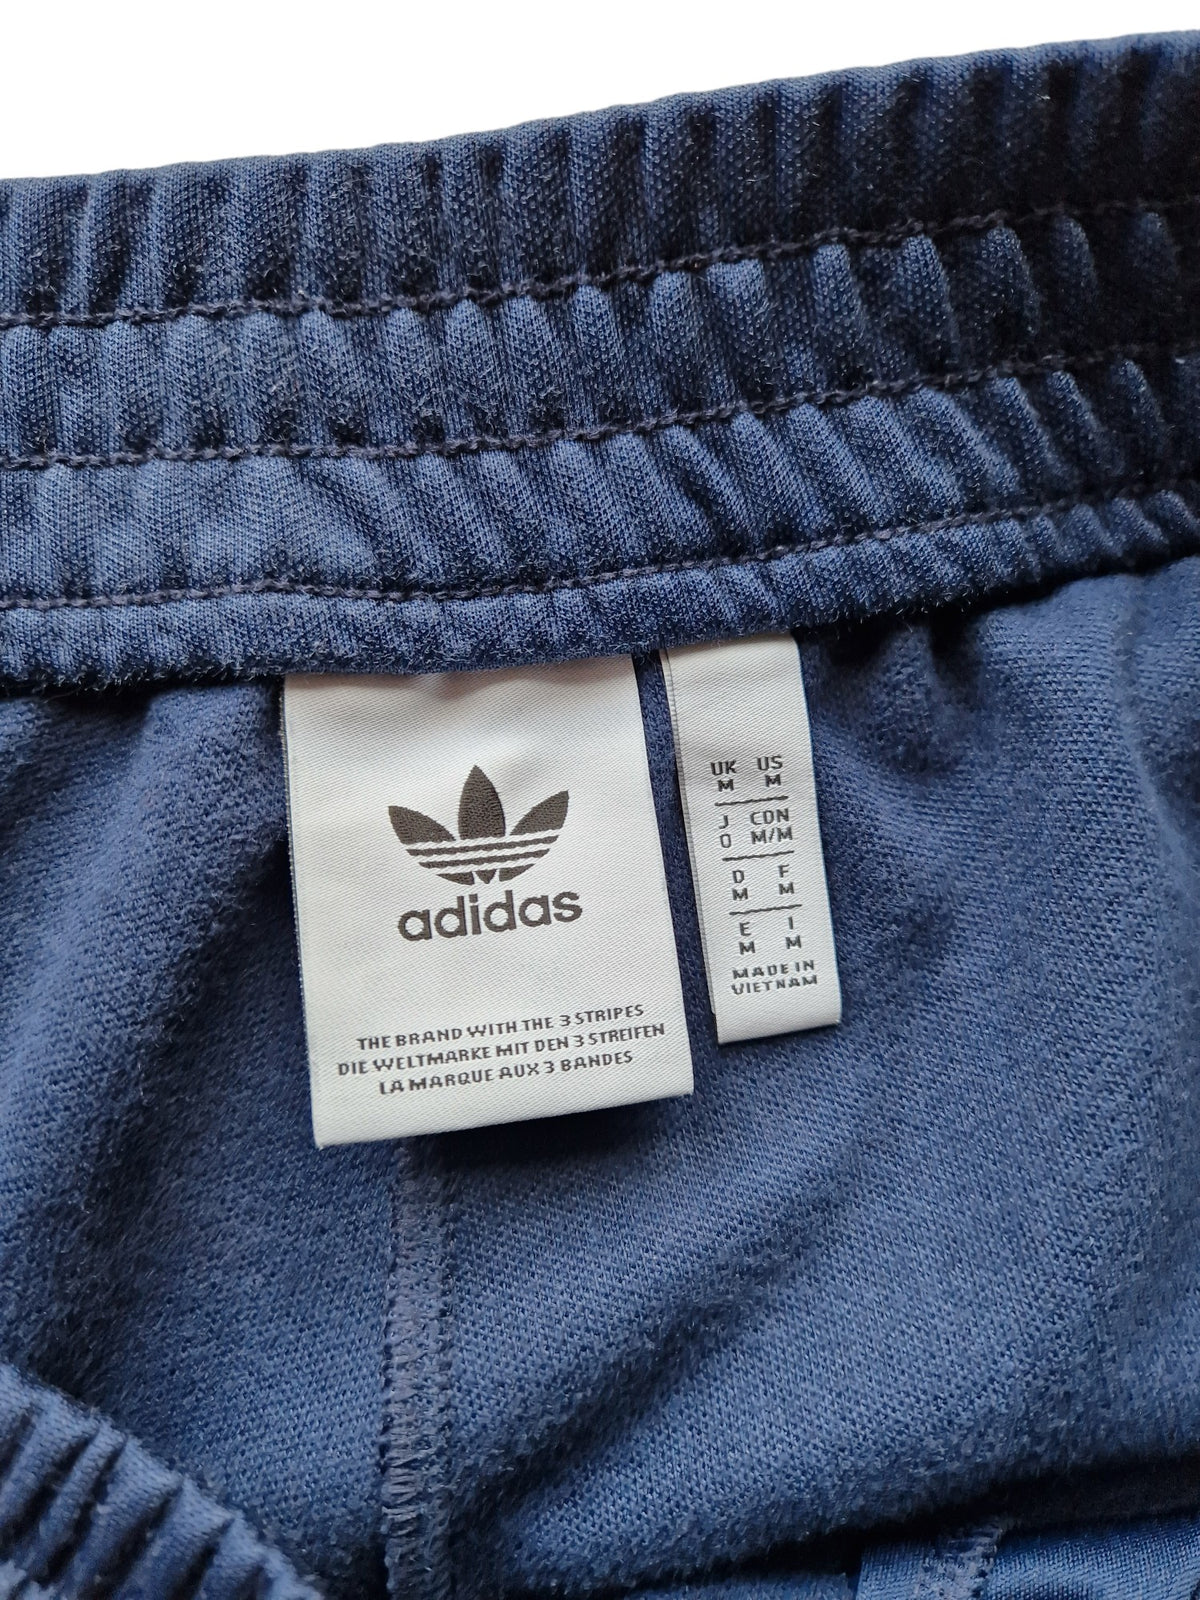 Adidas Poppers Tracksuit Bottoms - Size Medium